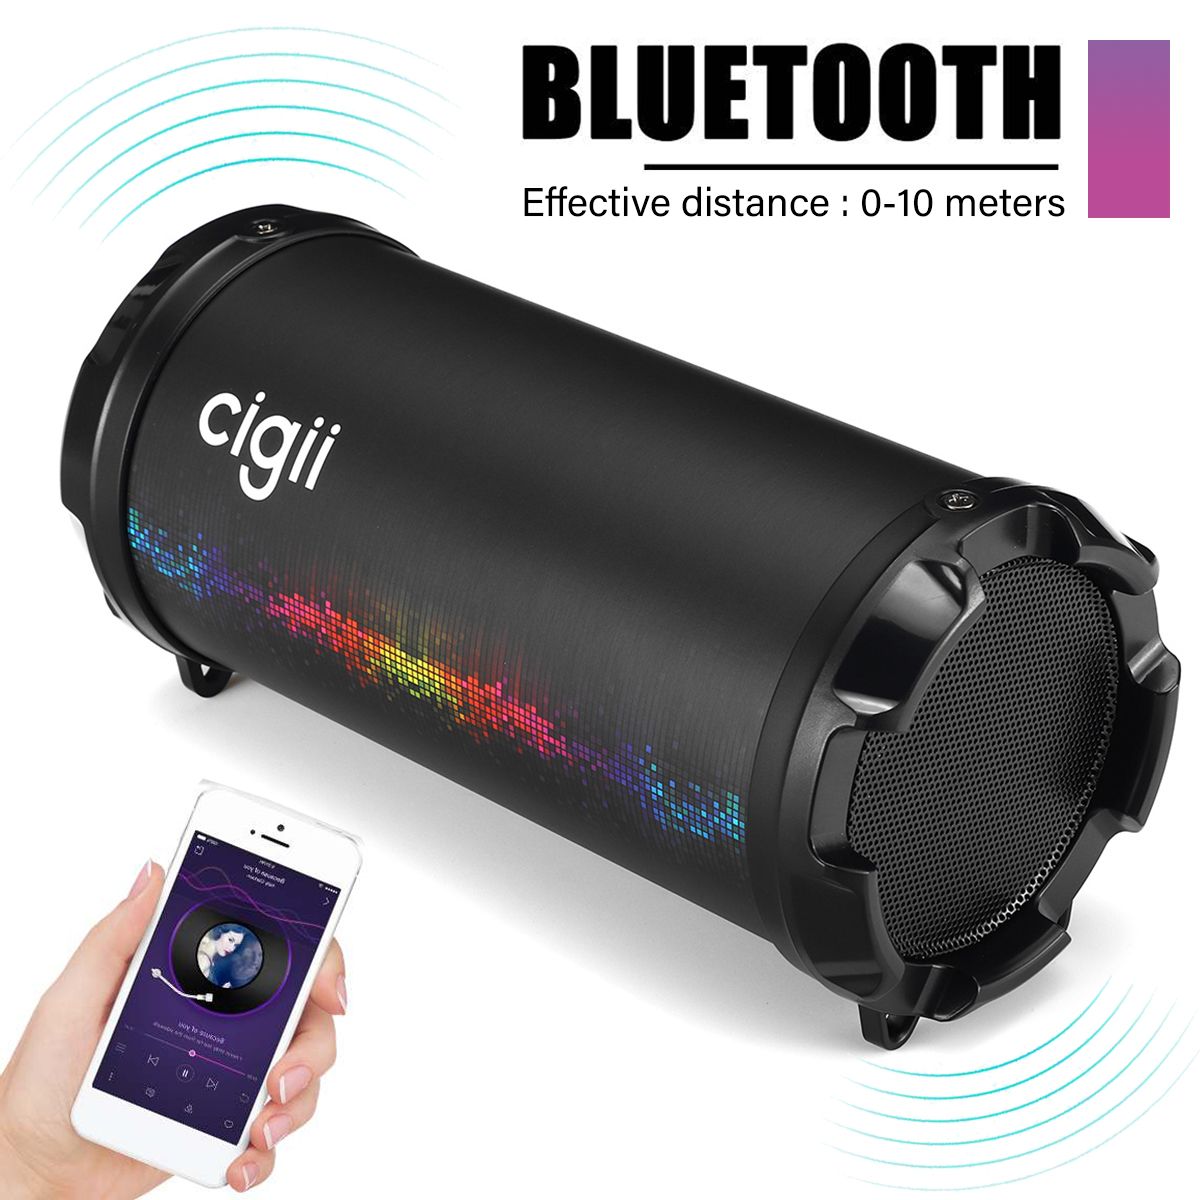 Wireless-Player-Portable-bluetooth-Speaker-Subwoofer-Outdoor-Headset-With-Mic-Suport-FM-AUX-USB-Micr-1416275